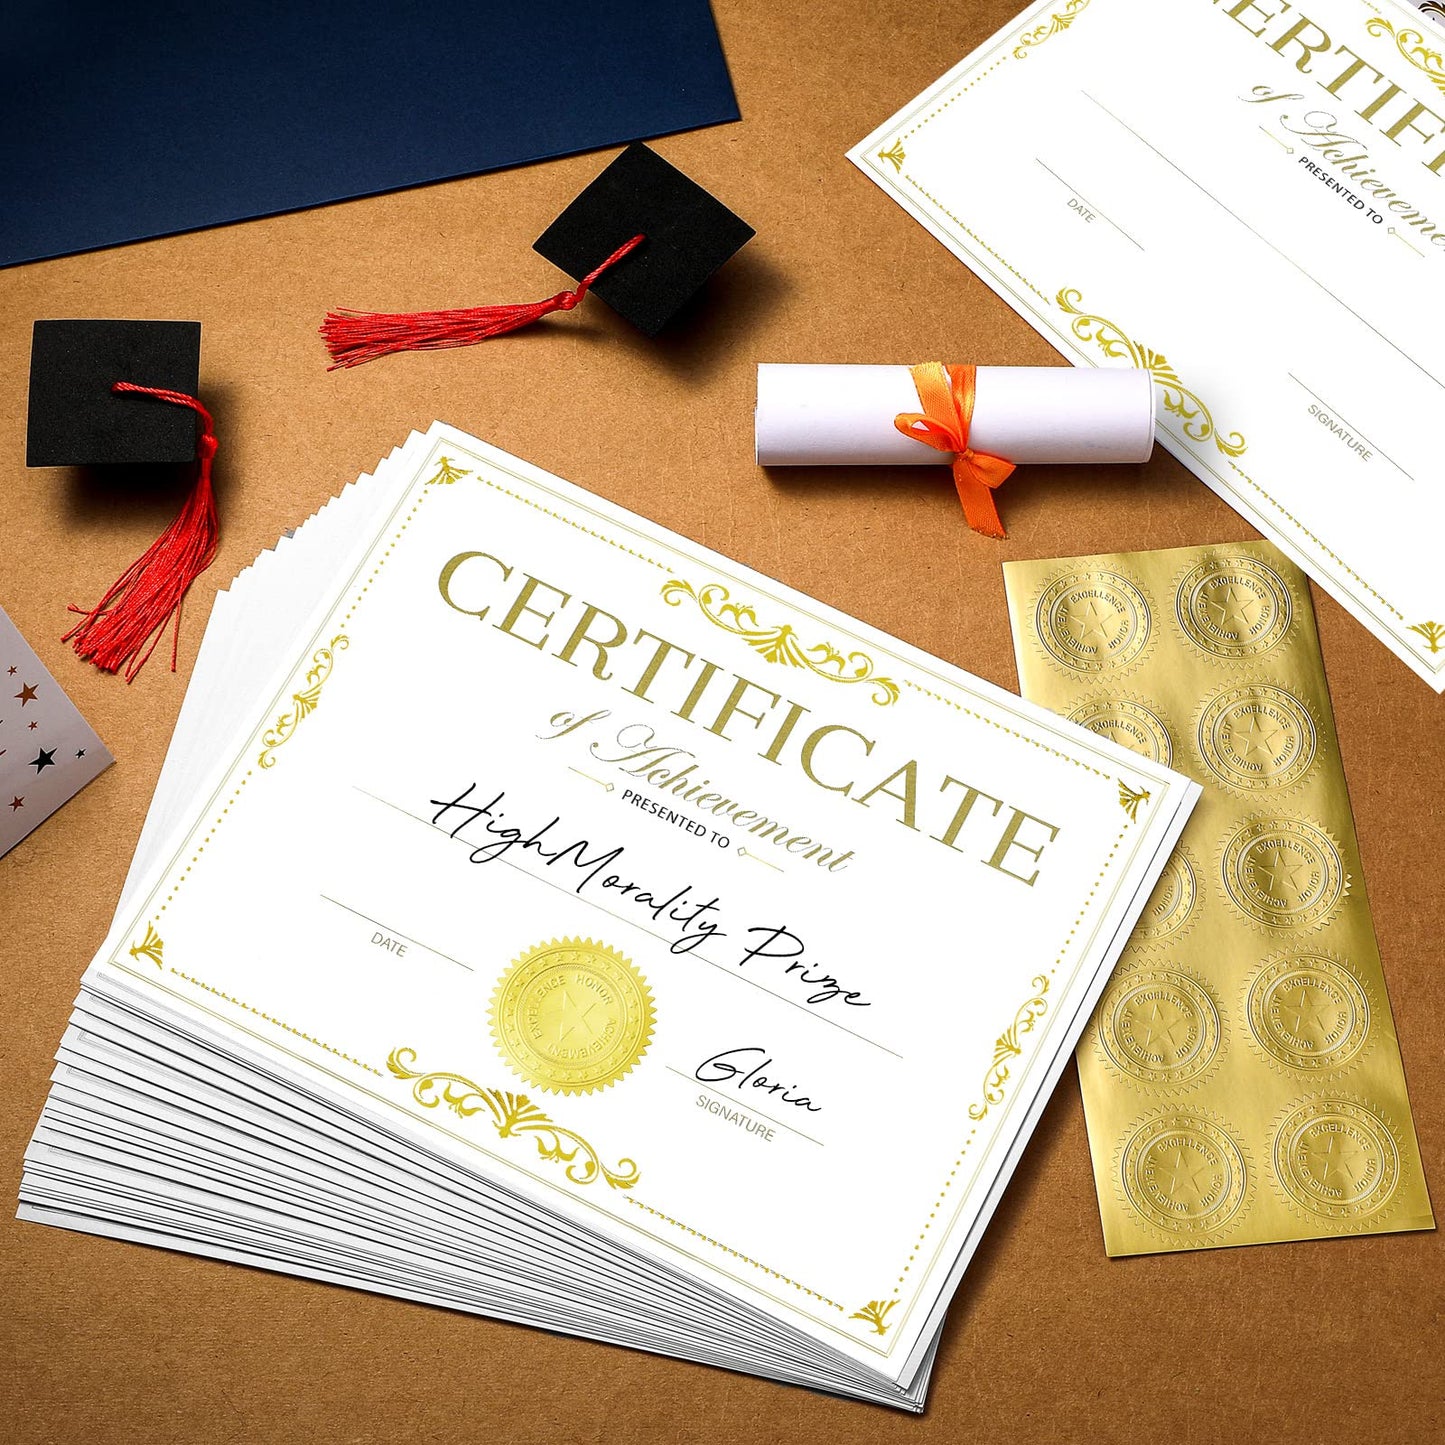 50 Packs Gold Foiled Certificate Paper Award 11 x 8.5 Inch Certificate of Completion Achievement Awards with 100 Pieces Embossed Gold Foil Seals Gold Seals Stickers for Printer Supplies